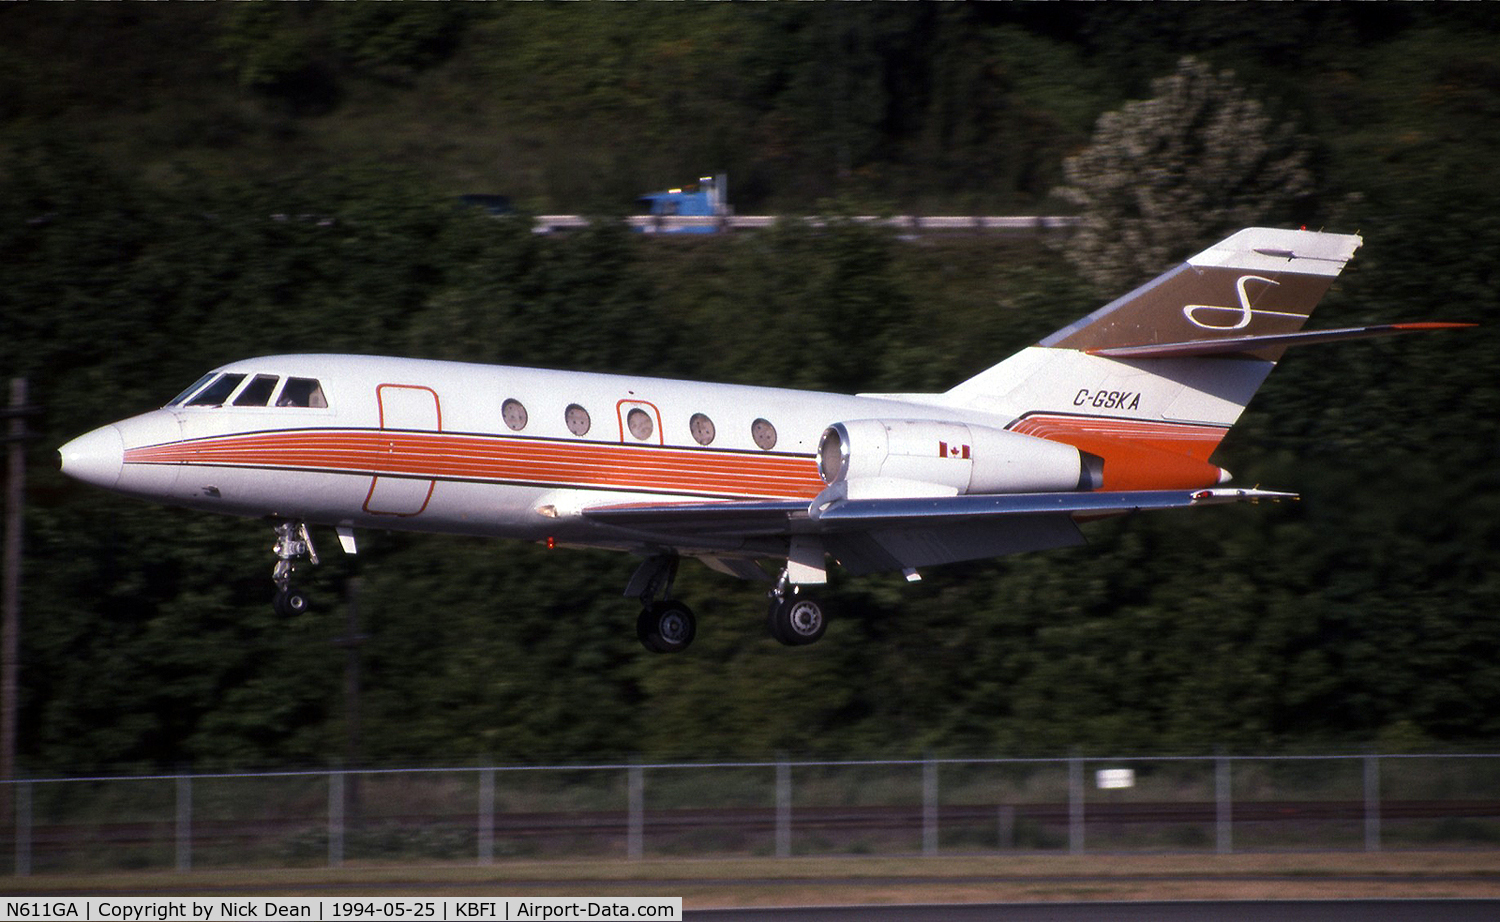 N611GA, 1965 Dassault Falcon (Mystere) 20C C/N 009, KBFI (1st flight 2/10/65 as F-WMKI delivered to Pan Am via Prestwick 12 Oct 1965 as N809F became N366G of GE 10/65 and subsequently carried 650-38, N3668 and seen here as C-GSKA registered as such Feb 1985 and finally as posted N611GA for c/n accuracy)